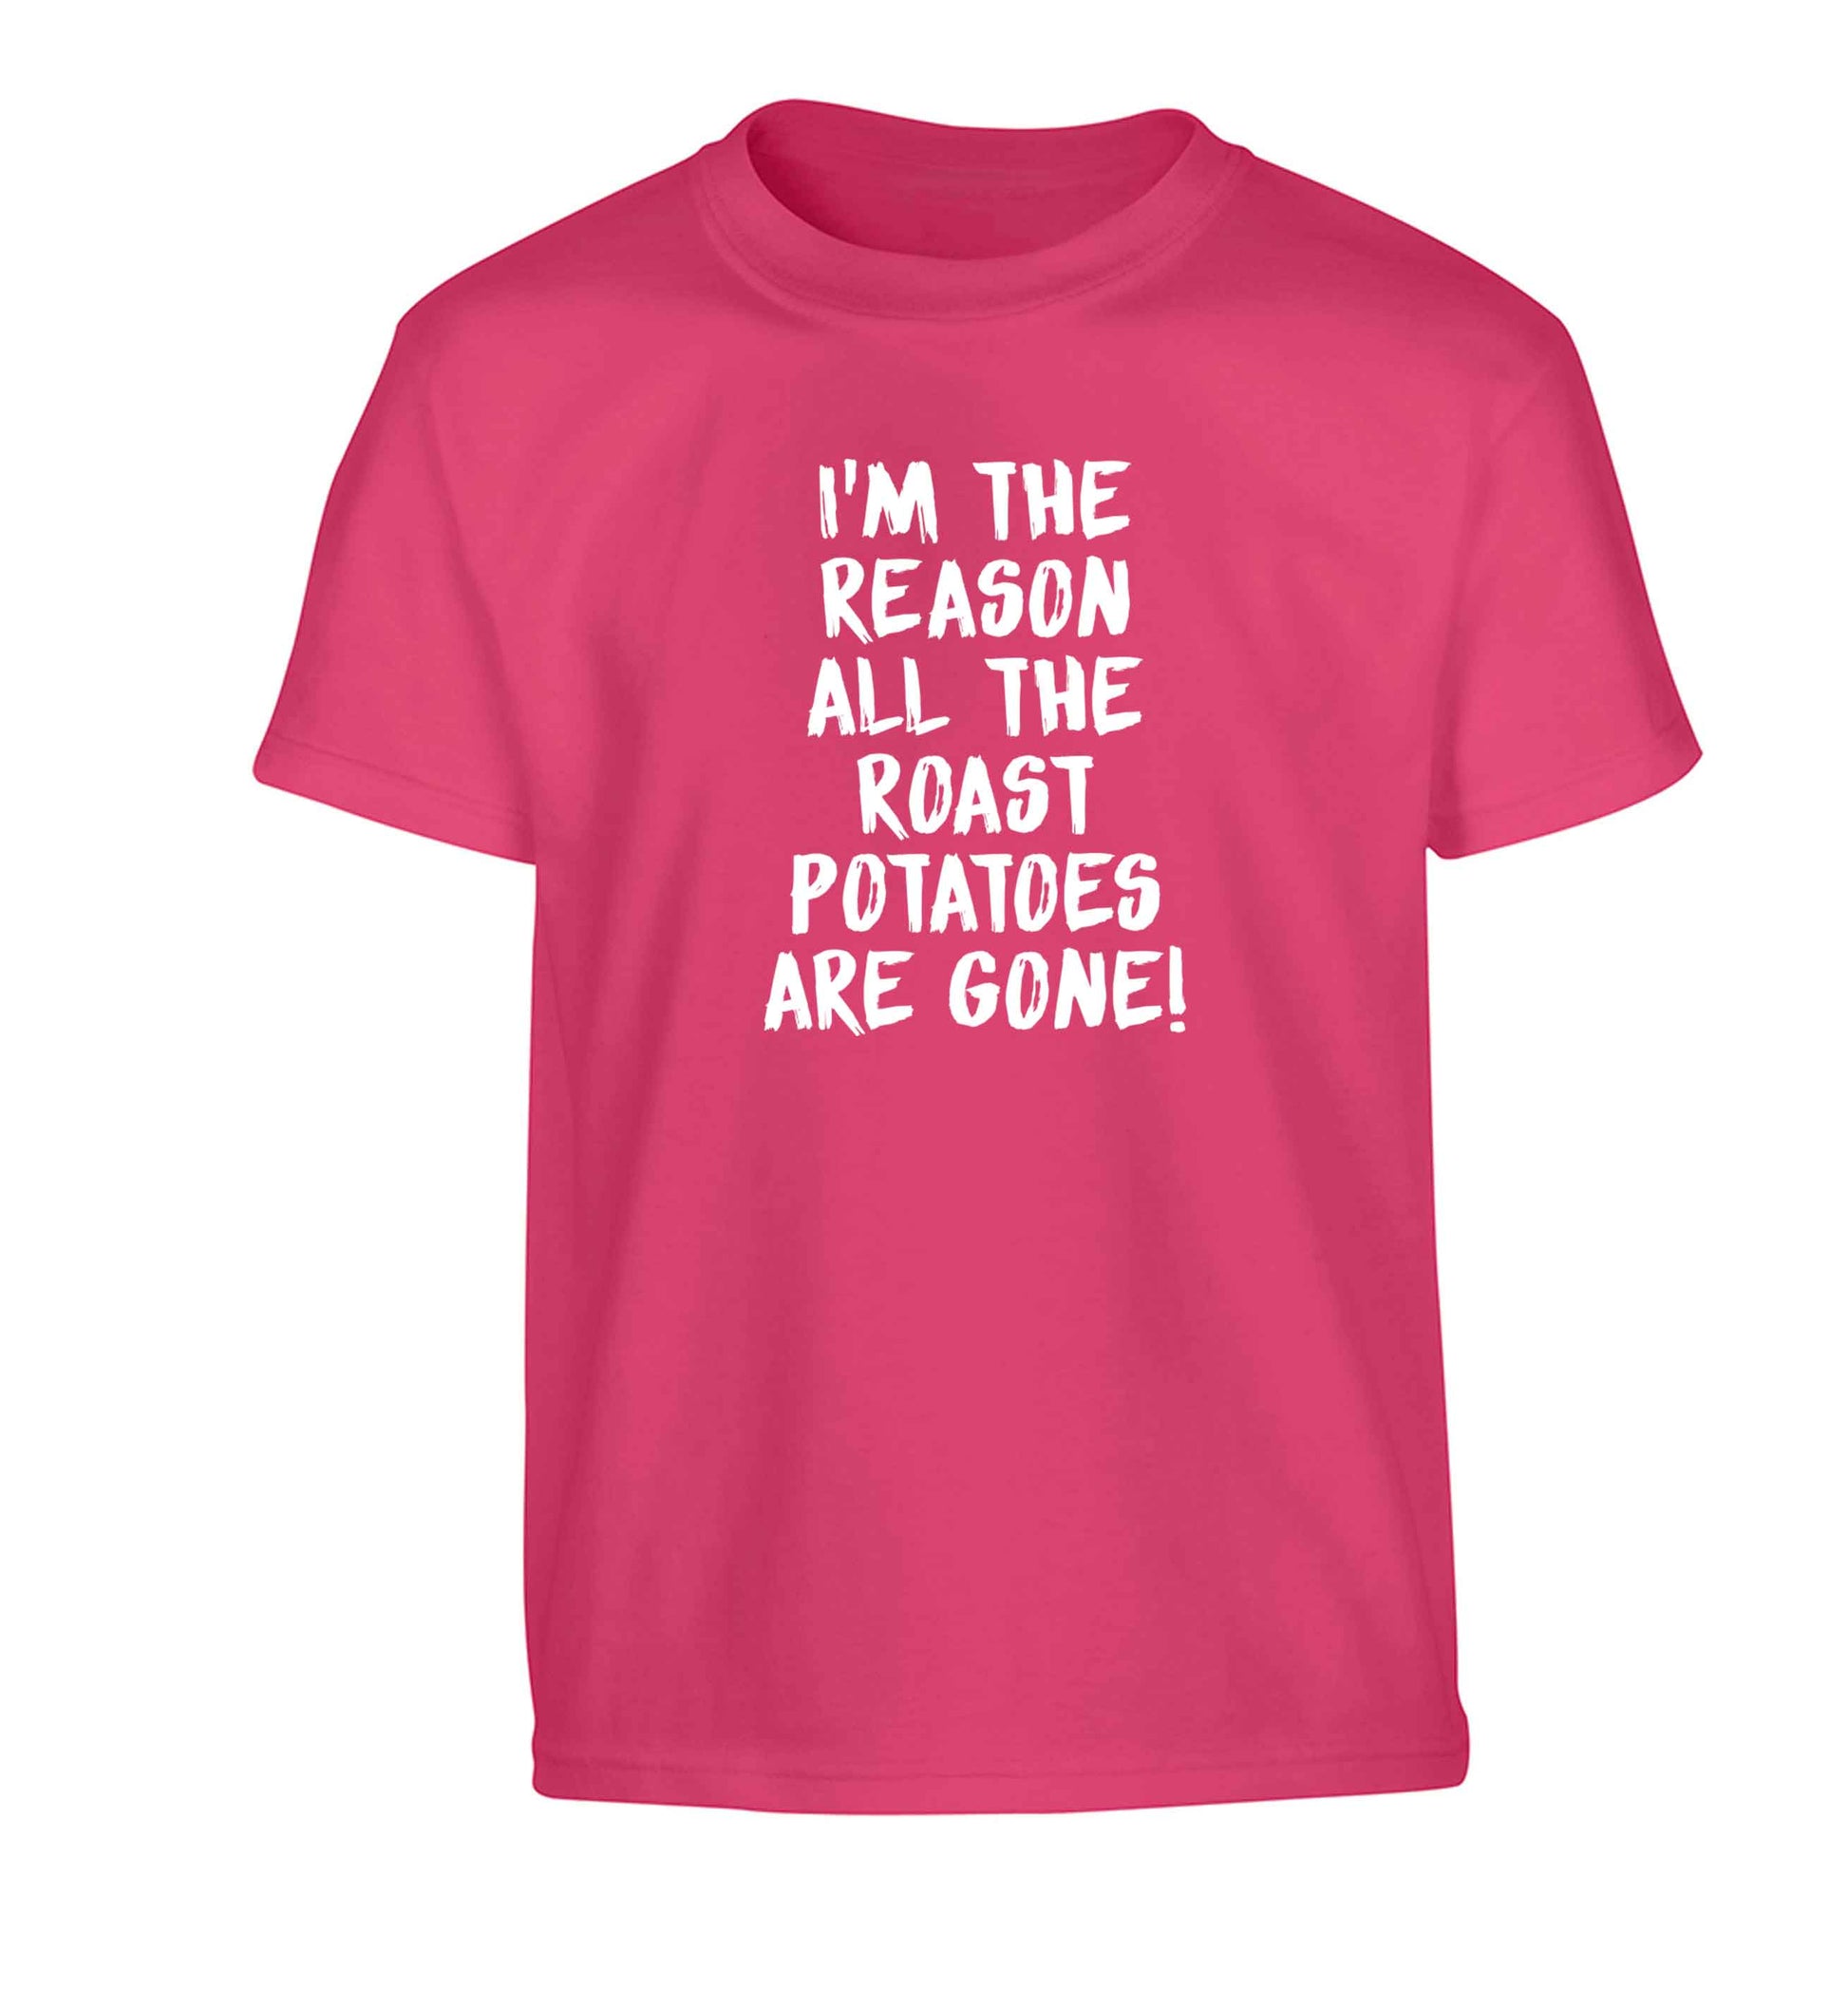 I'm the reason all the roast potatoes are gone Children's pink Tshirt 12-13 Years